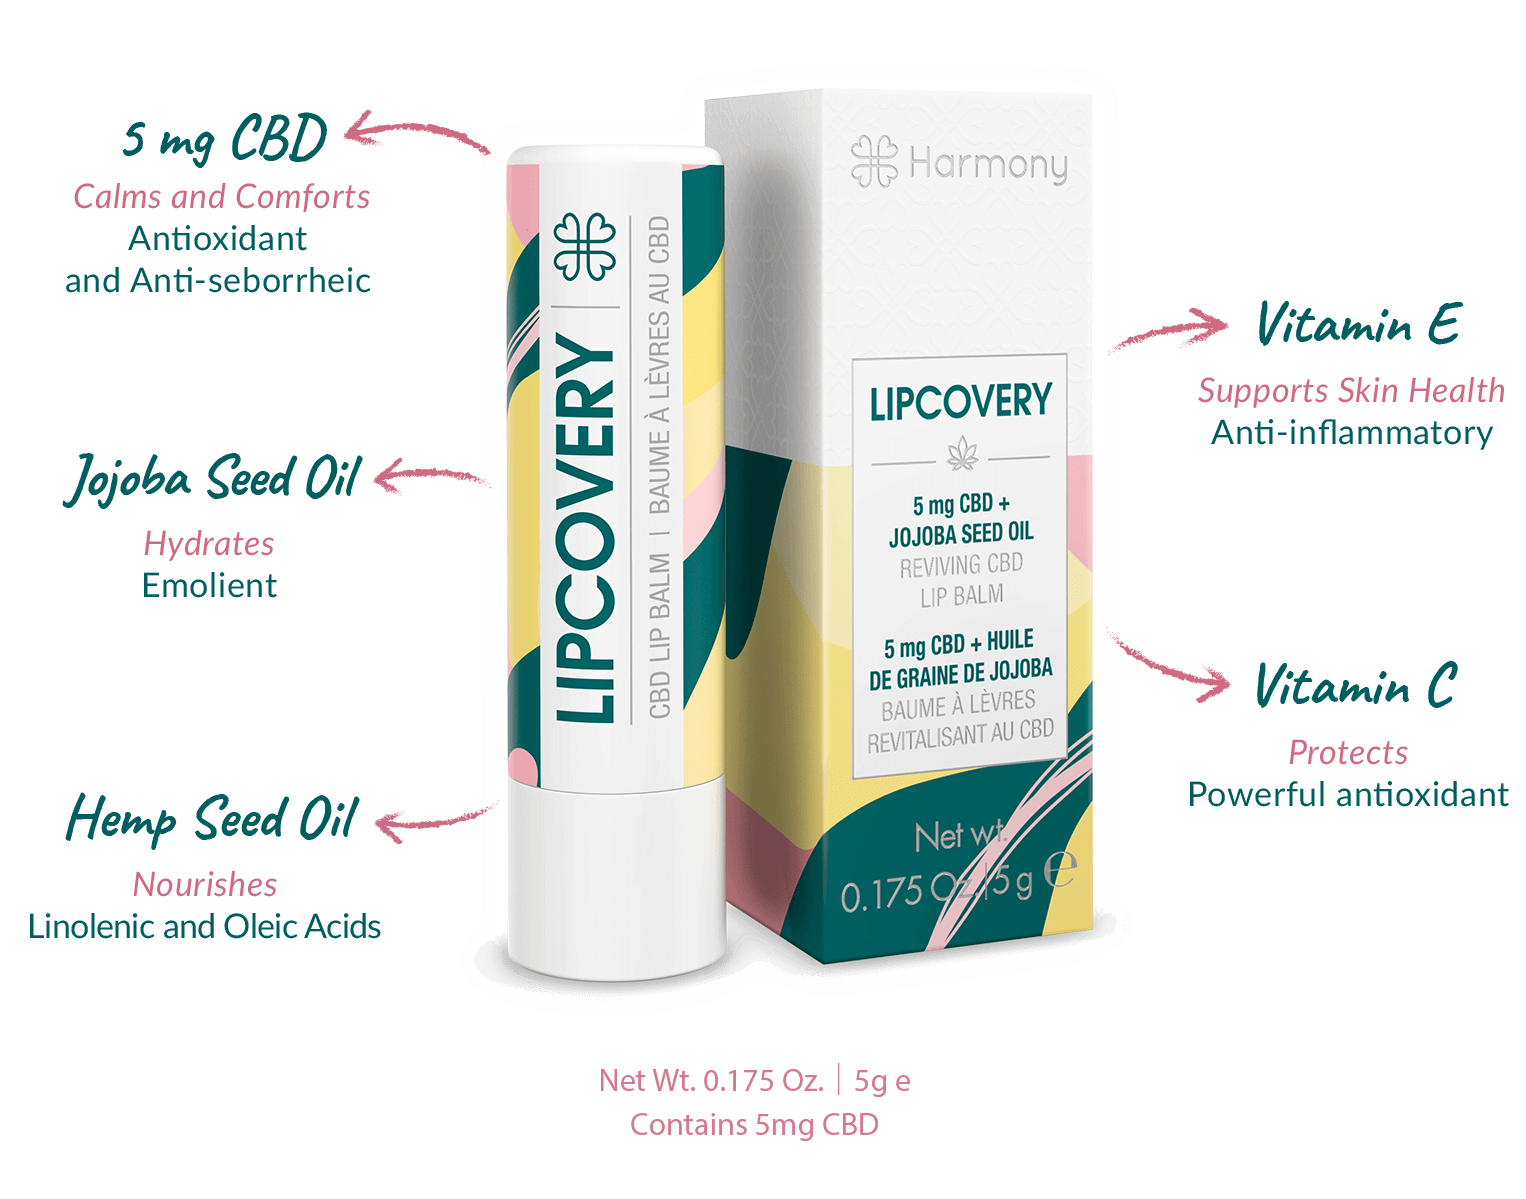 Lipcovery-Product-advantages-visuals-Mobile(1)(1)